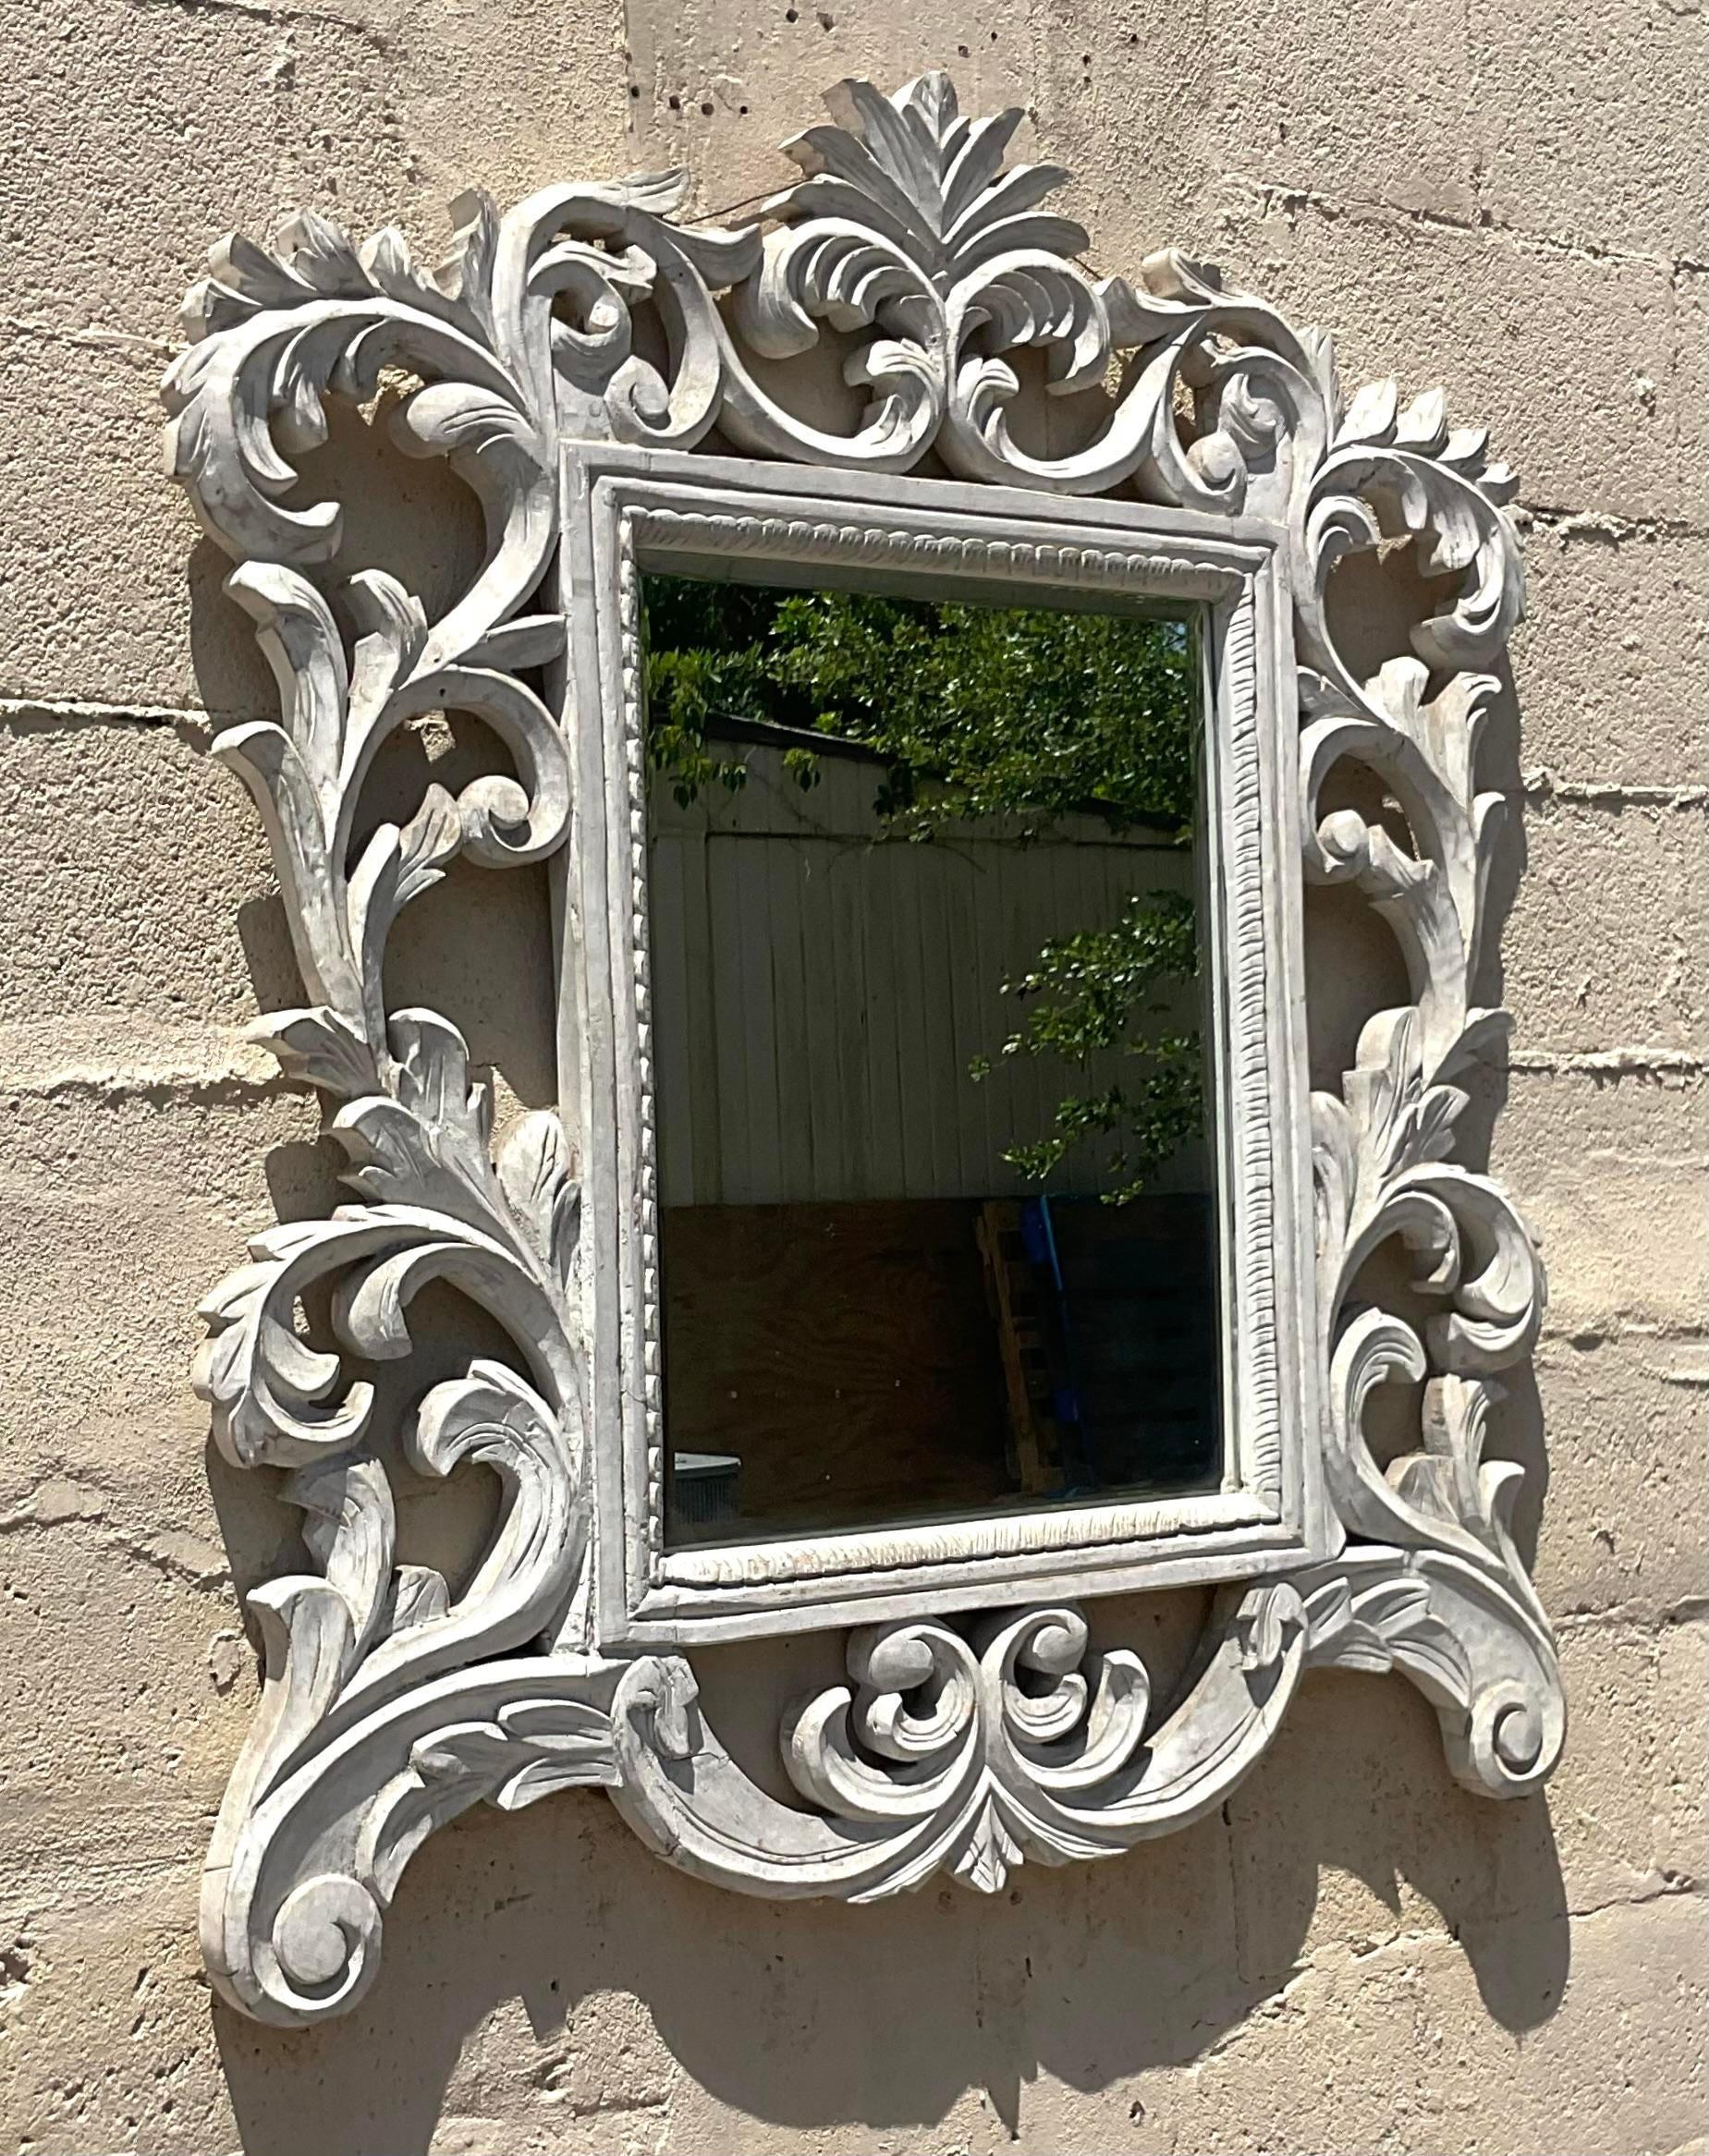 Step into timeless elegance with our Vintage Regency Carved Scrolling Vine Mirror. American-crafted, this mirror features intricate scrolling vine motifs, blending classic Regency style with artistic craftsmanship for a sophisticated and luxurious